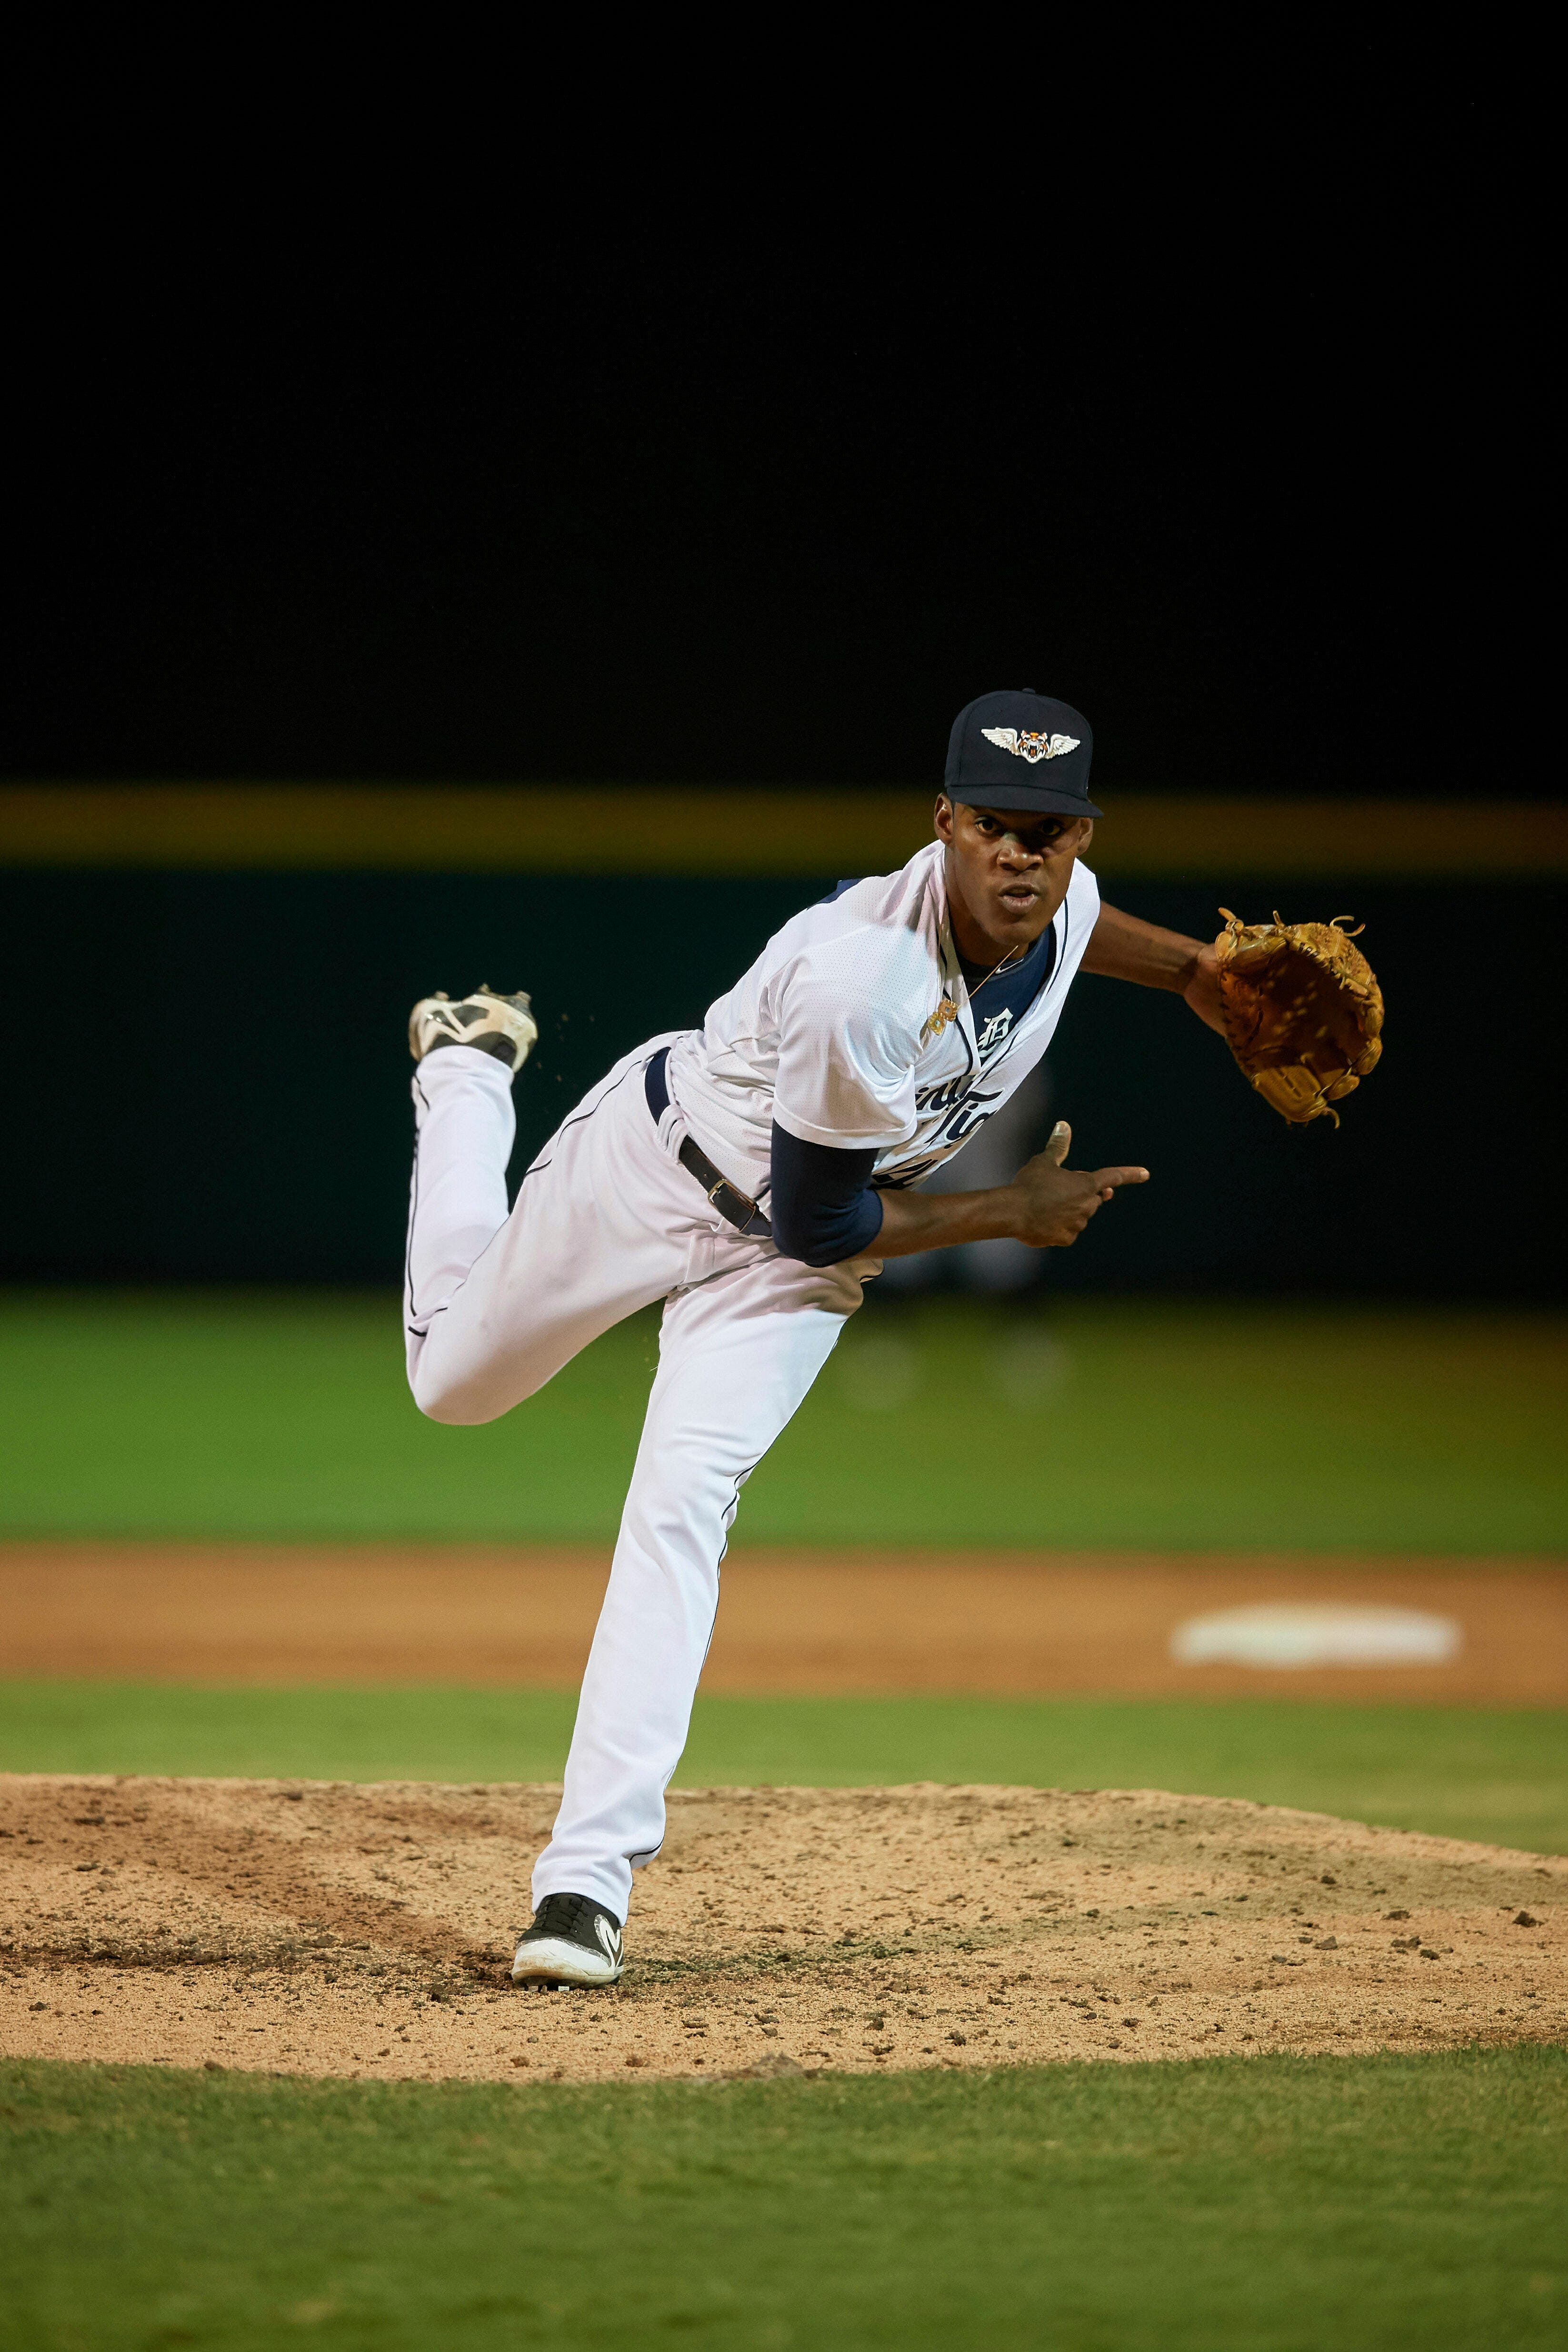 14. Angel De Jesus, 22, 6-4, 200, RH reliever: Another of those fireballers who can make late innings no fun for batters who don’t appreciate hard stuff that moves as De Jesus’ pitches tend to bore. De Jesus turns 23 on Feb. 13, so it’s time to do at Erie this season what he did a year ago at West Michigan and Lakeland, combined: 1.61 ERA, 1.08 WHIP, .168 enemy batting average, 37 hits in 61.1 innings, with 85 strikeouts and 29 walks.